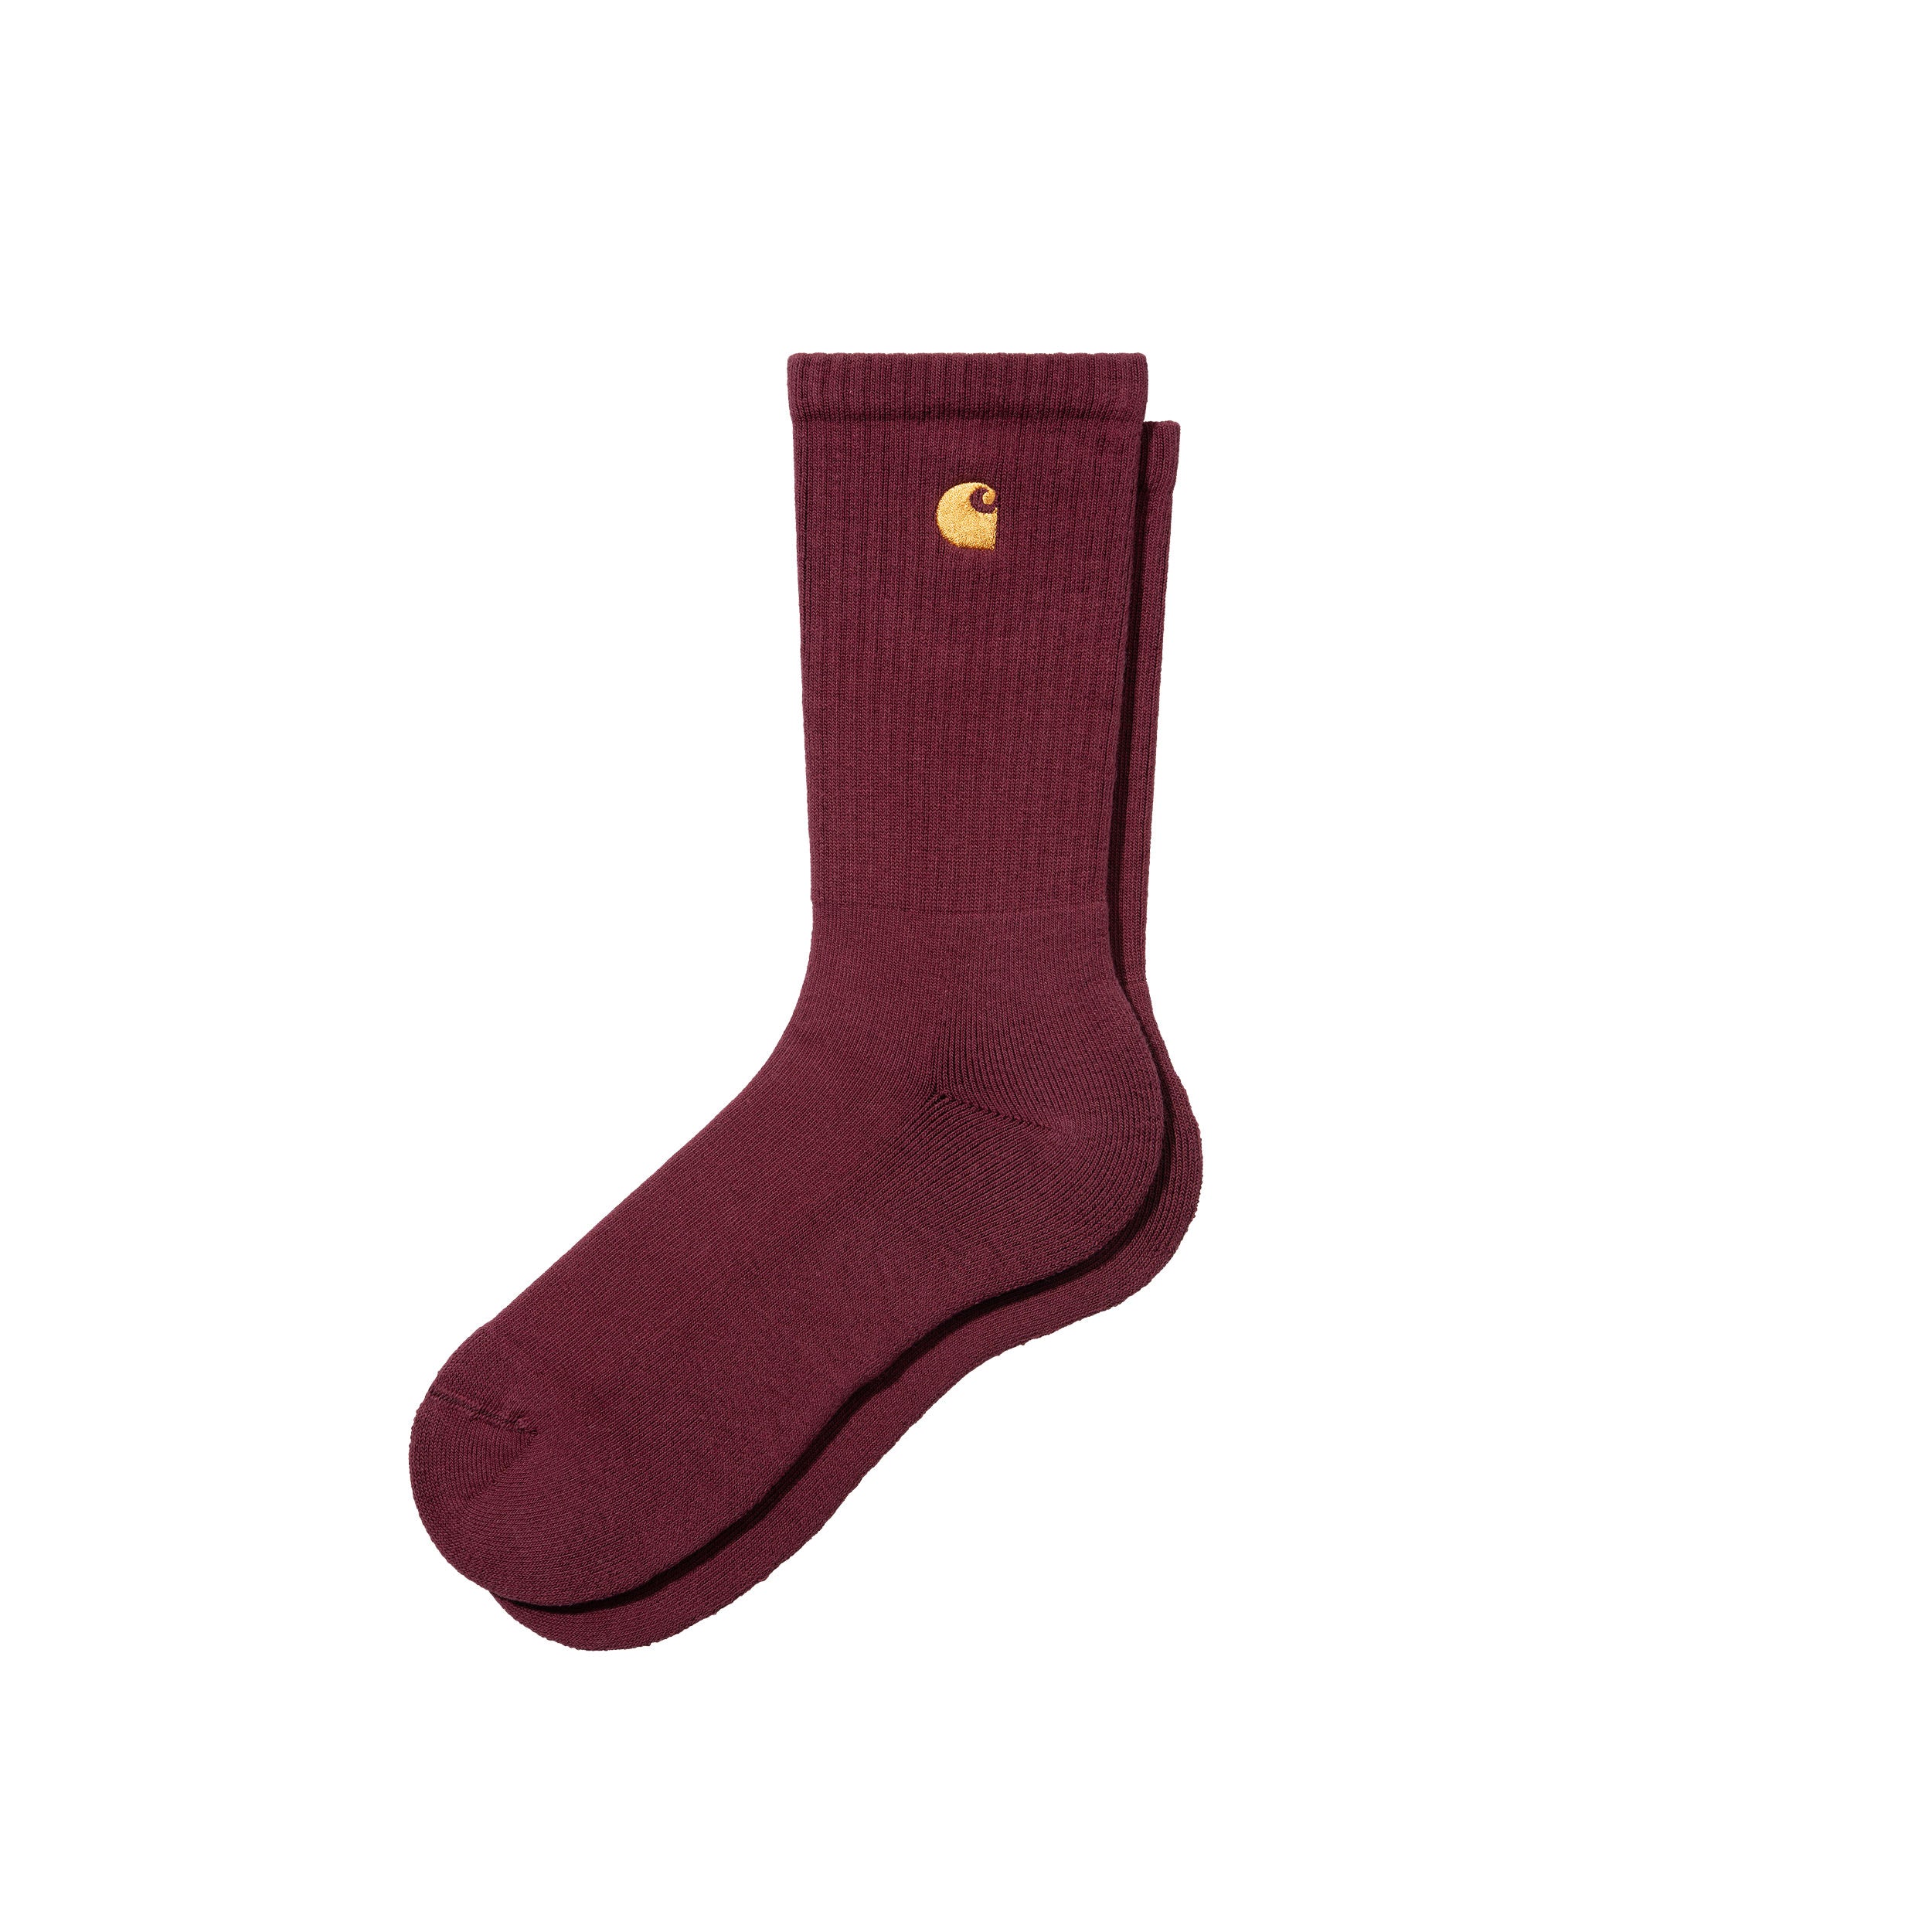 Carhartt WIP Chase Socks (amarone/gold) - Blue Mountain Store